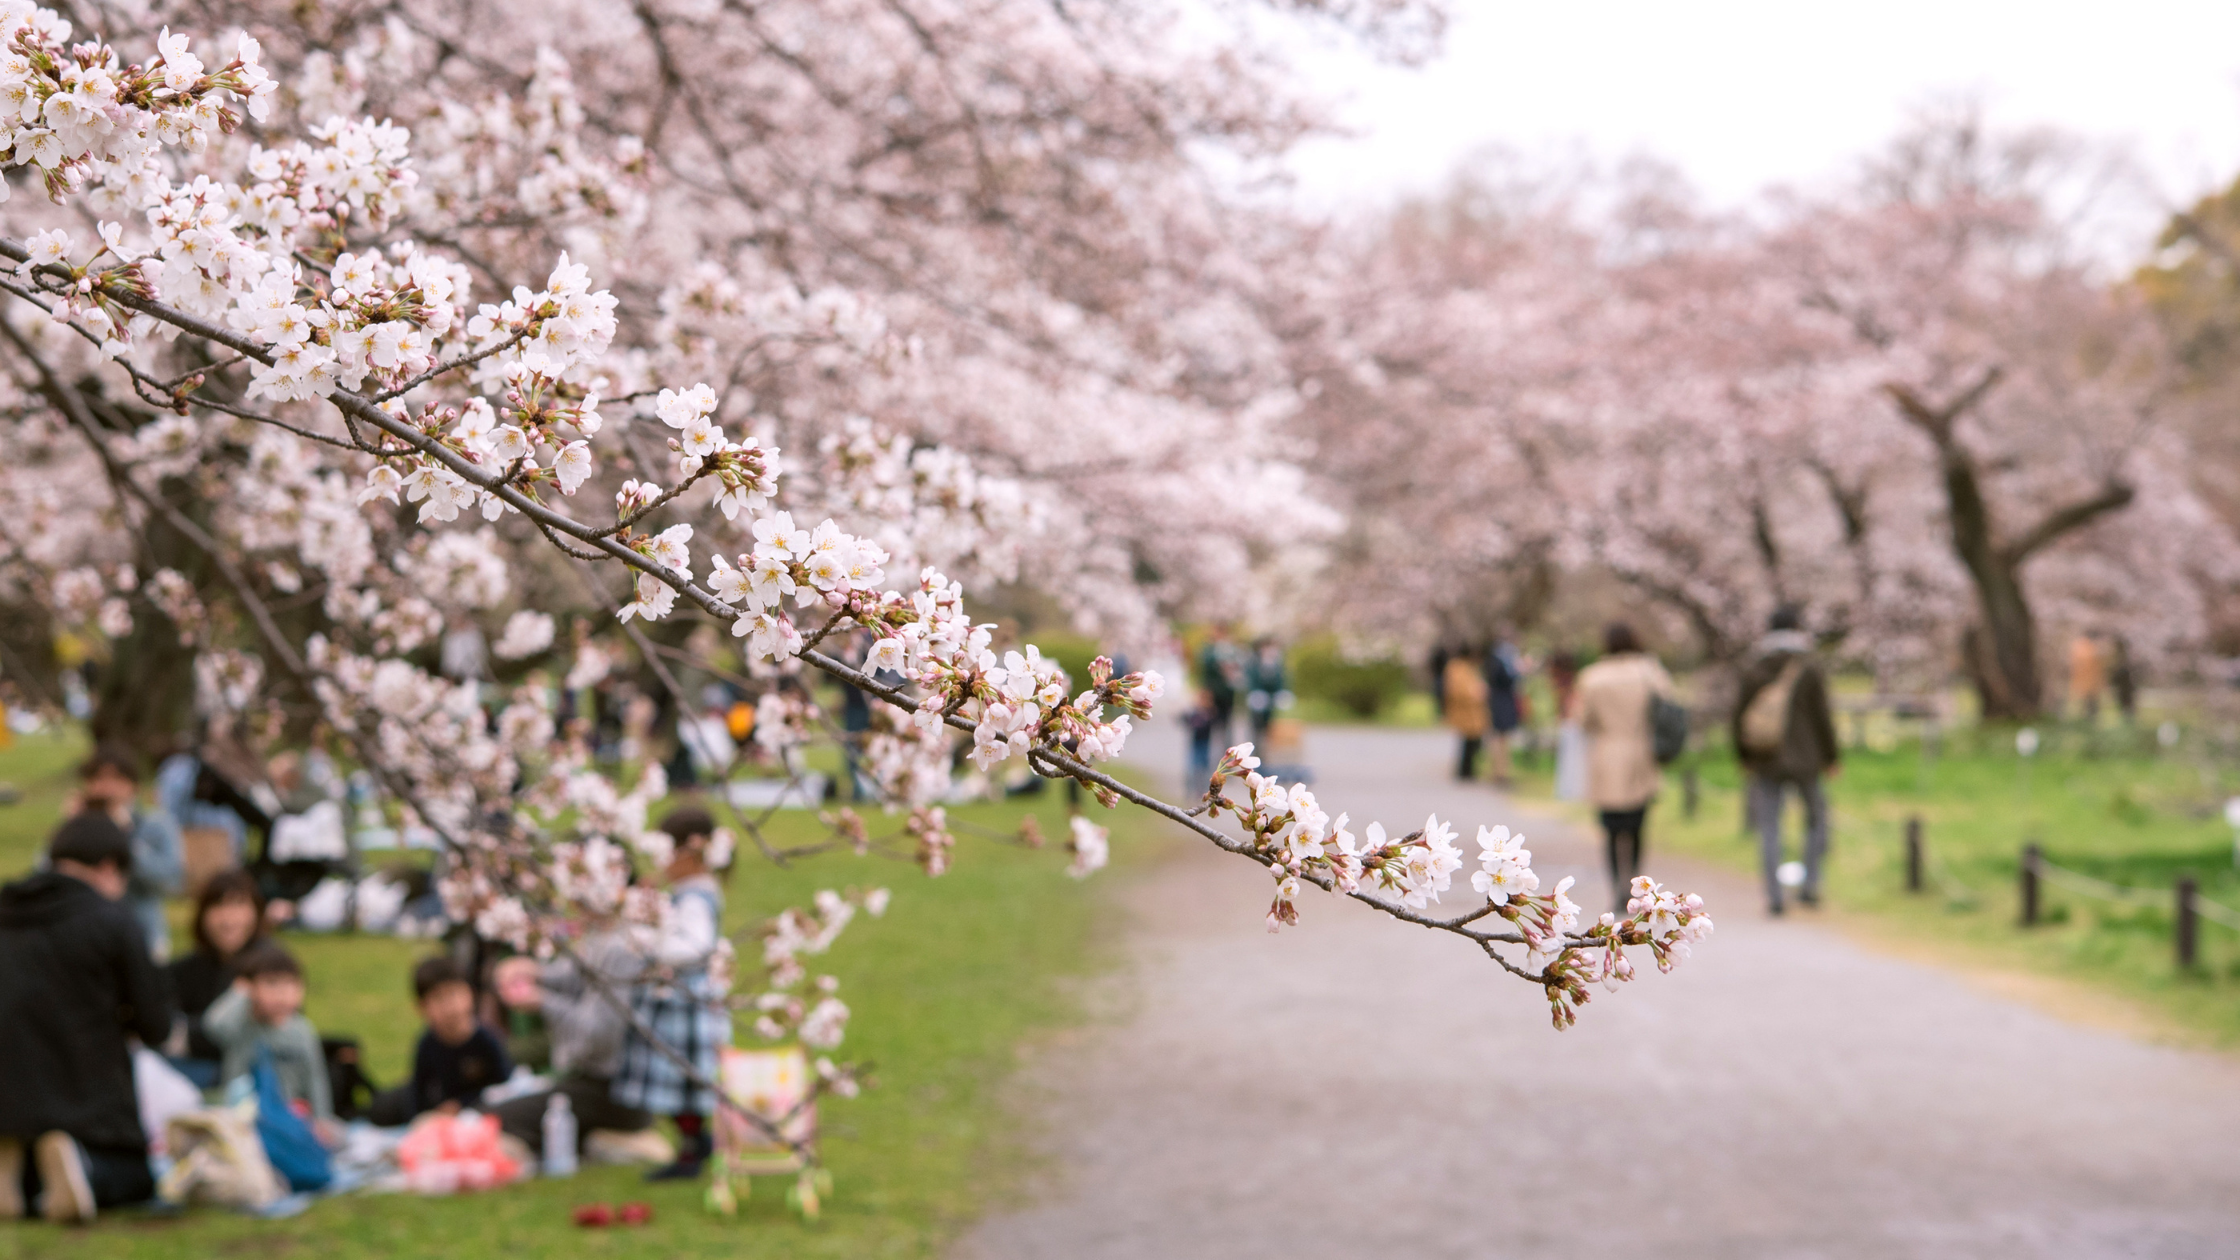 10 Fast Facts About Cherry Blossom Trees